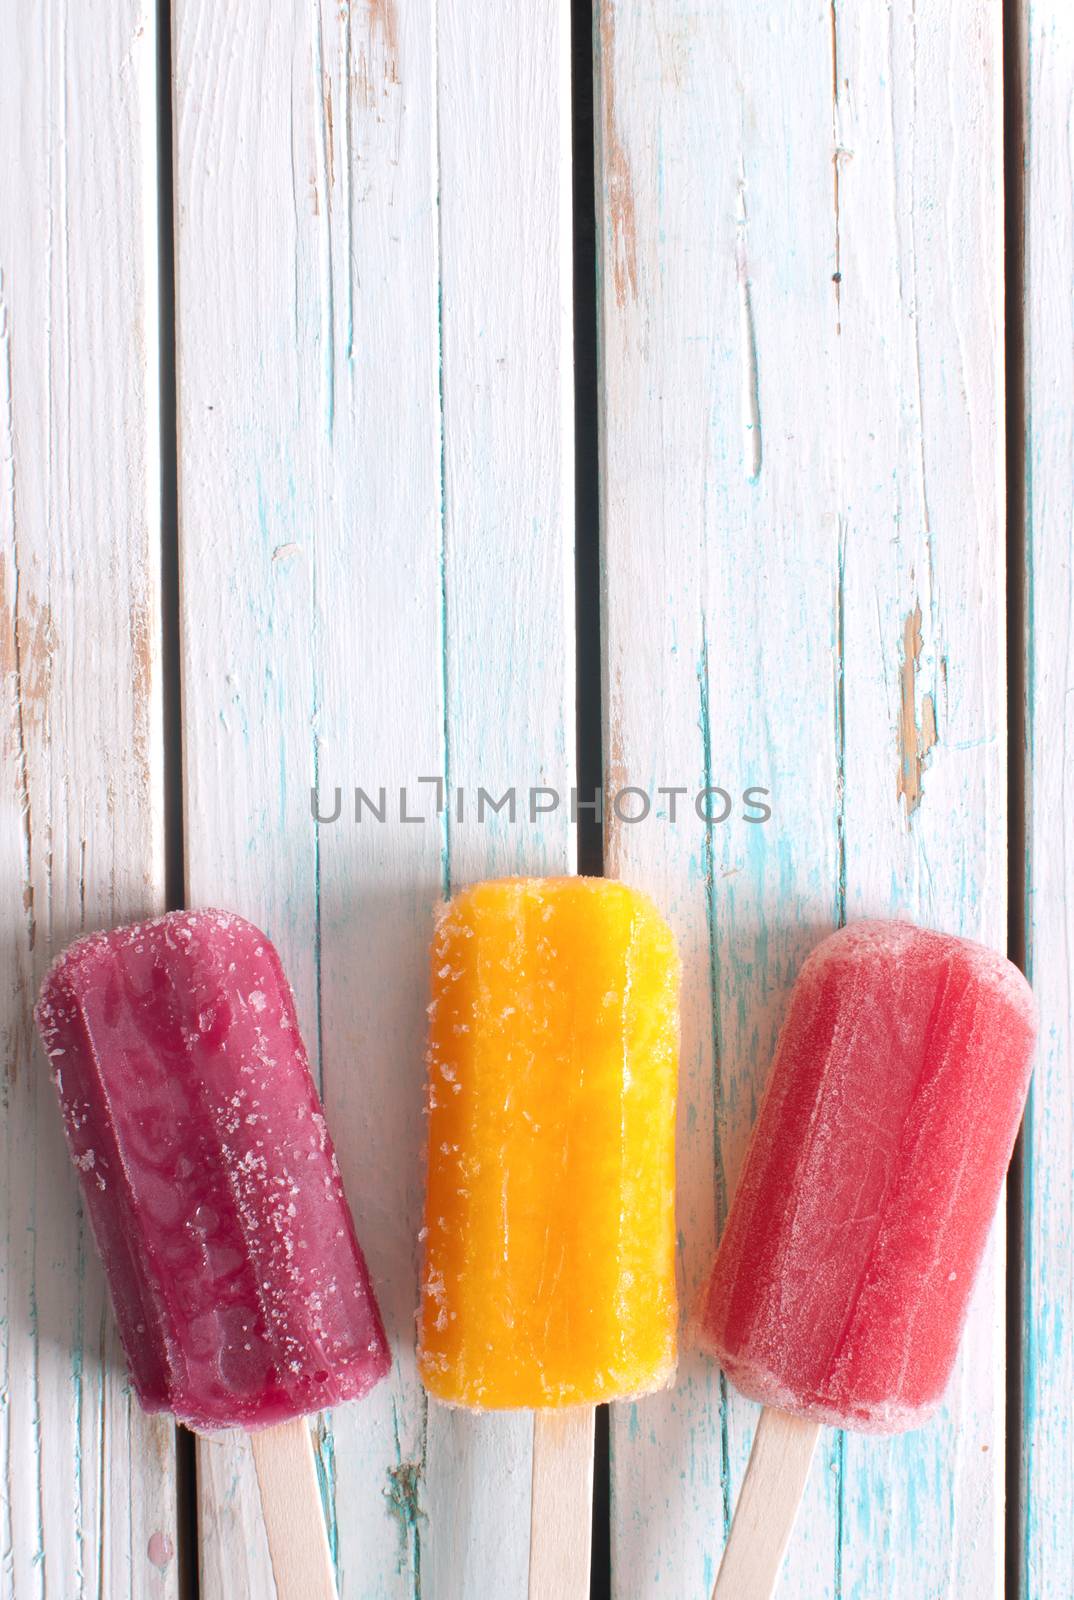 Frozen ice popsicles various flavors on wooden background with space